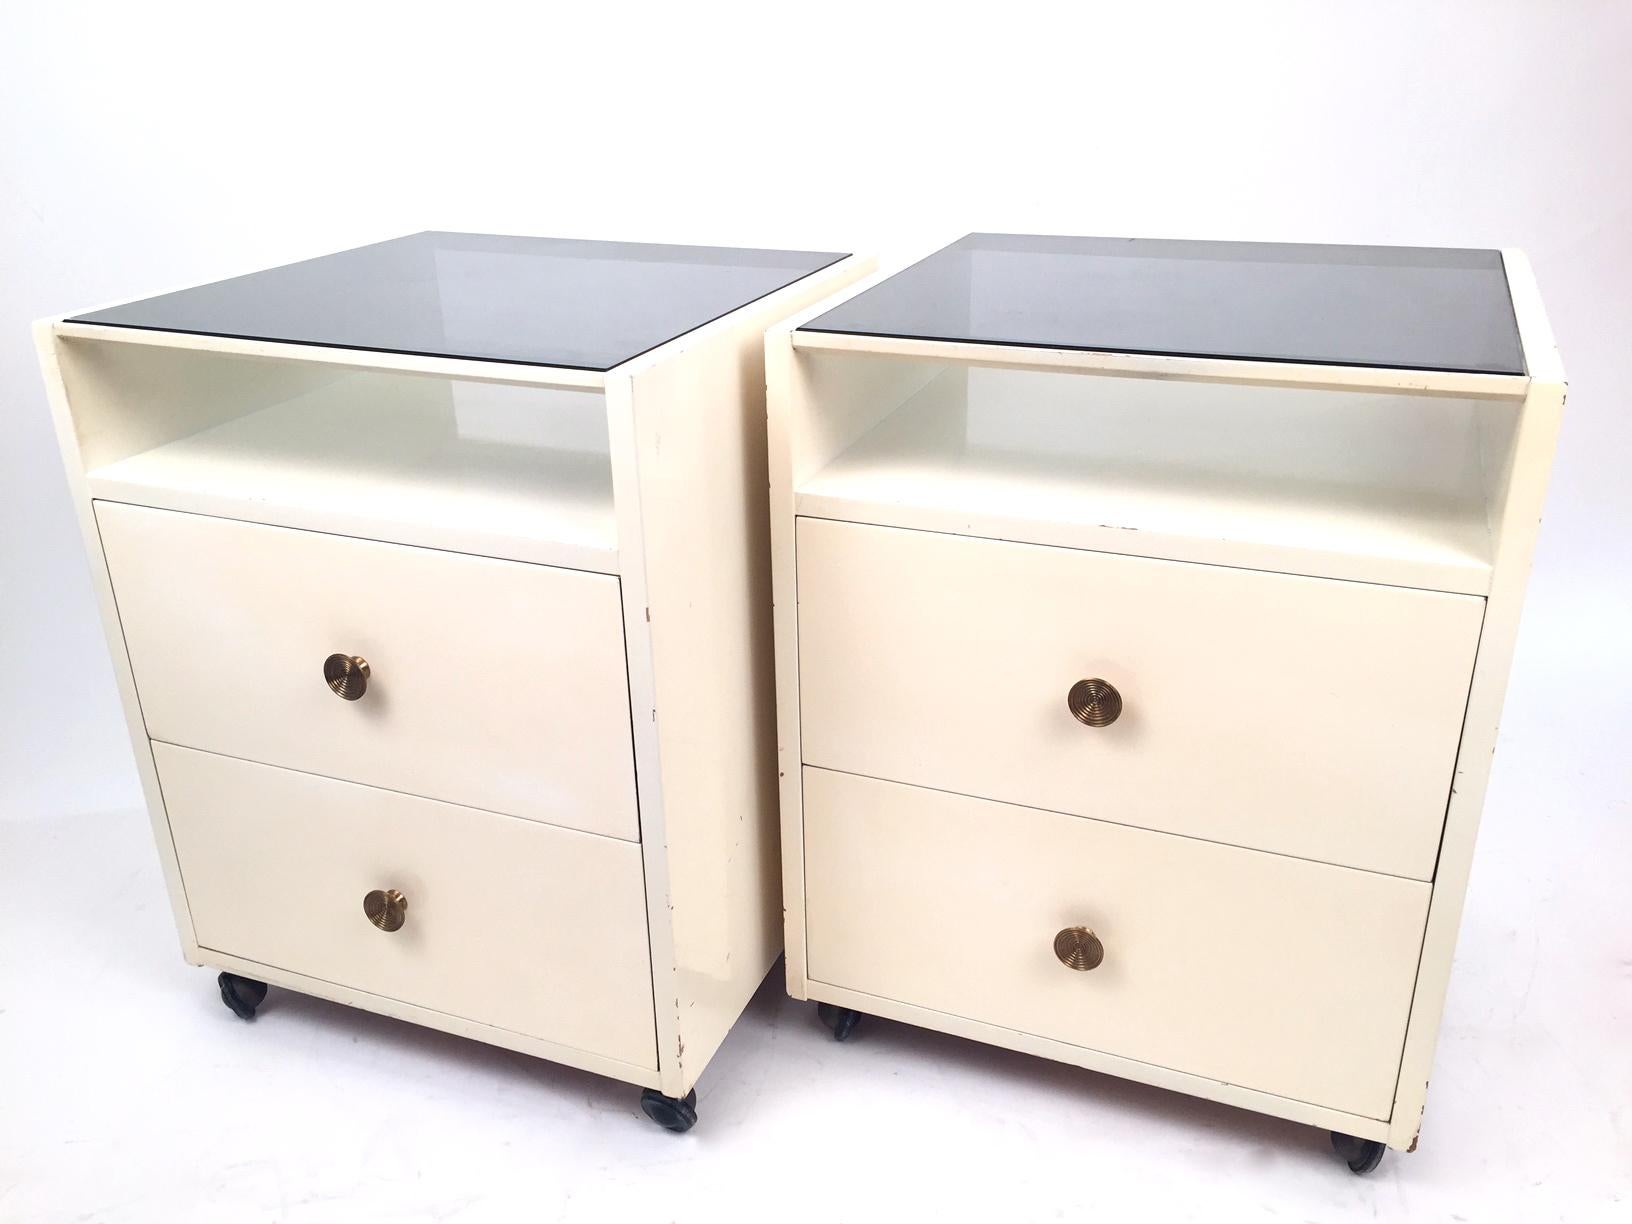 A beautiful pair of Carlo de Carli nightstands, edited by Sormani in the 1960s. Lacquered wood, glass top and brass.